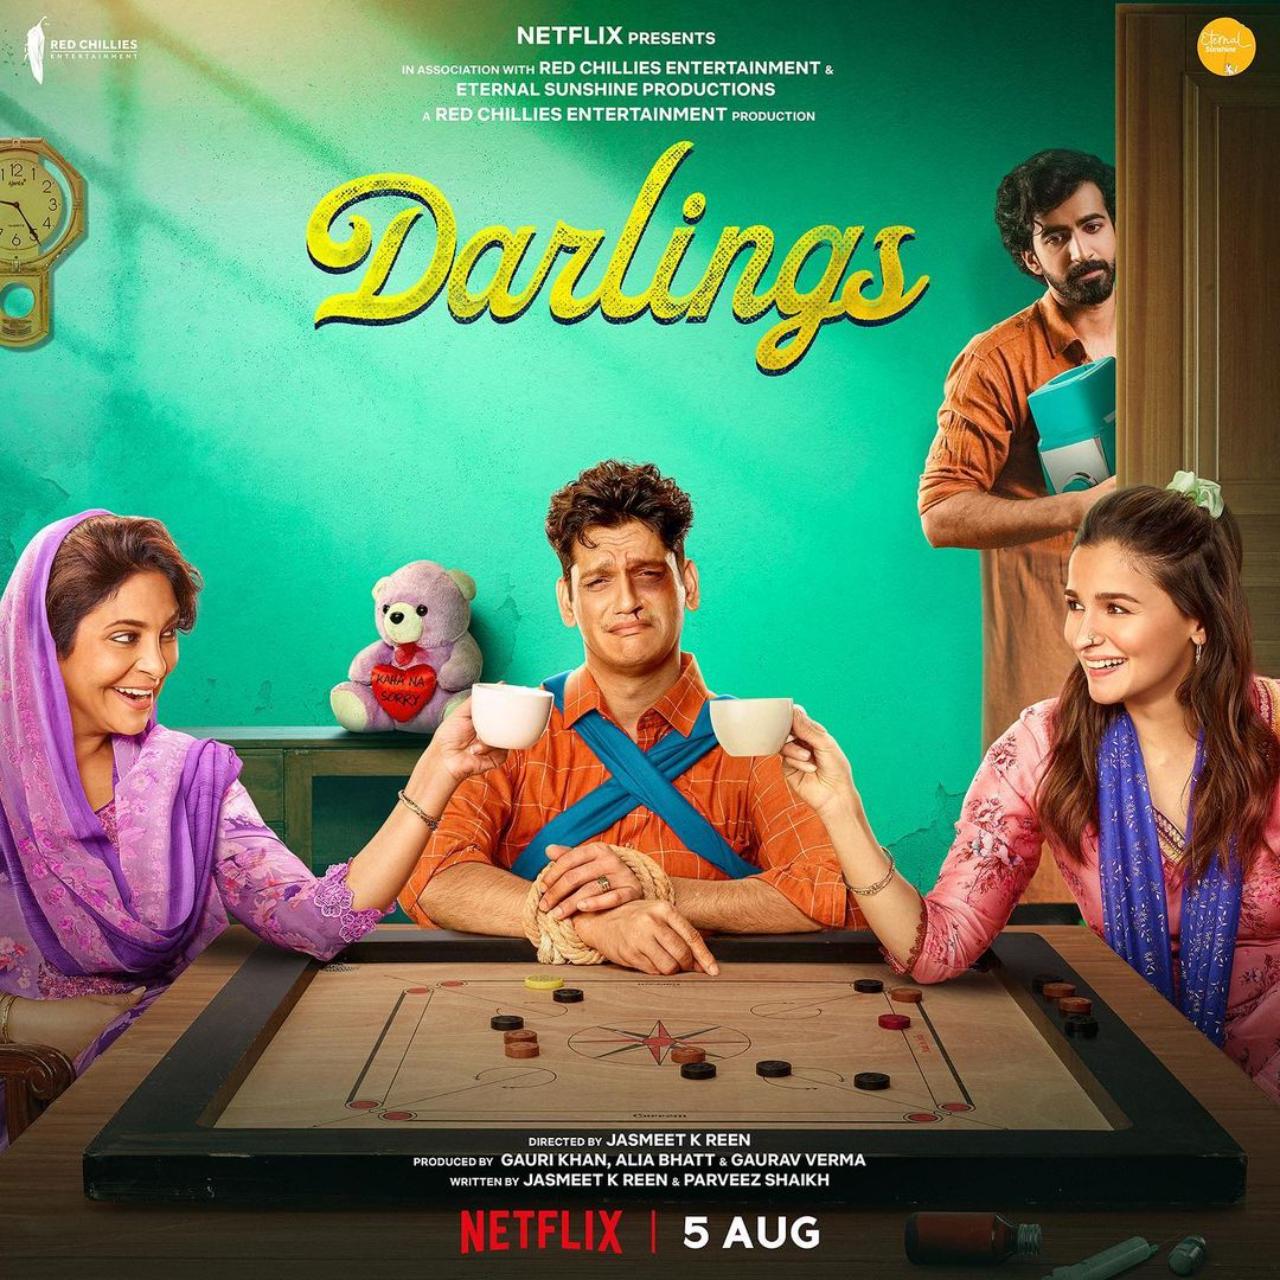 Soon after, Alia treated fans to the first glimpse of her upcoming film 'Darlings'. The film which will be released on Netflix also stars Shefali Shah, Roshan Matthew, and Vijay Verma. The film also marks the debut of Alia's production house Eternal Sunshine Productions. Alia dropped the teaser and posters of the film on social media